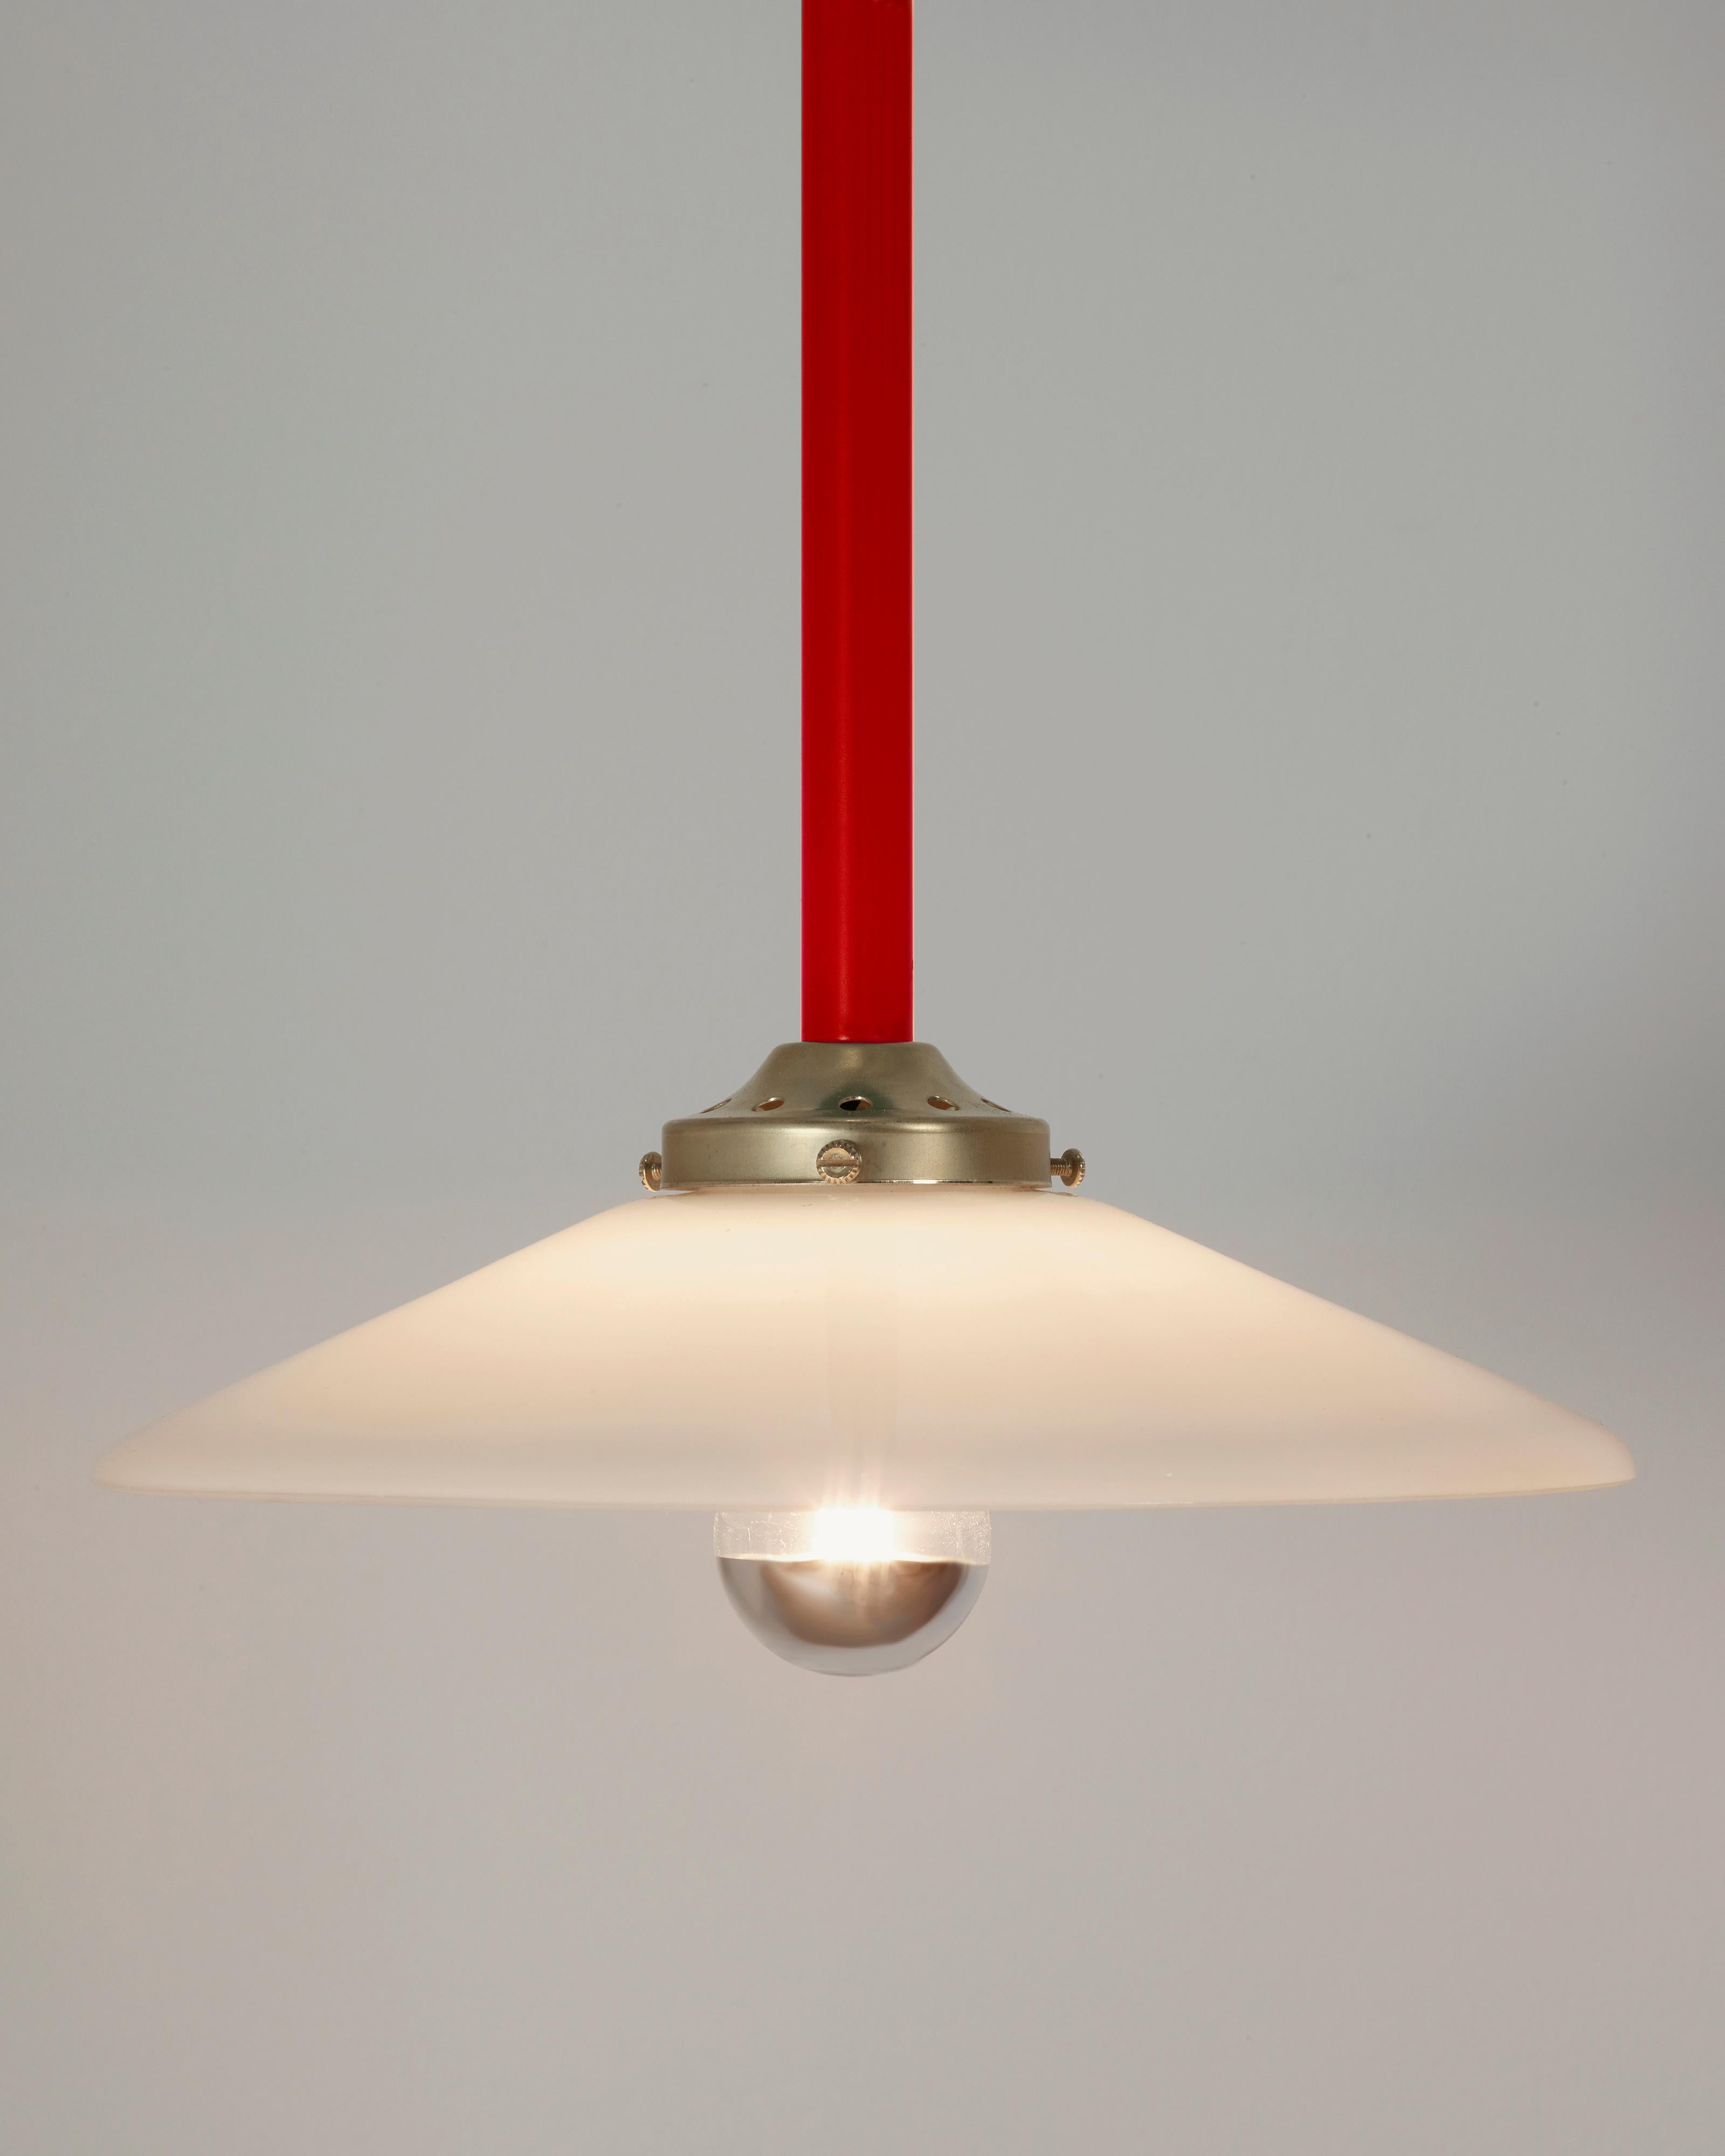 Organic Modern Contemporary Ceiling Lamp N°5 by Muller Van Severen x Valerie Objects, Red For Sale